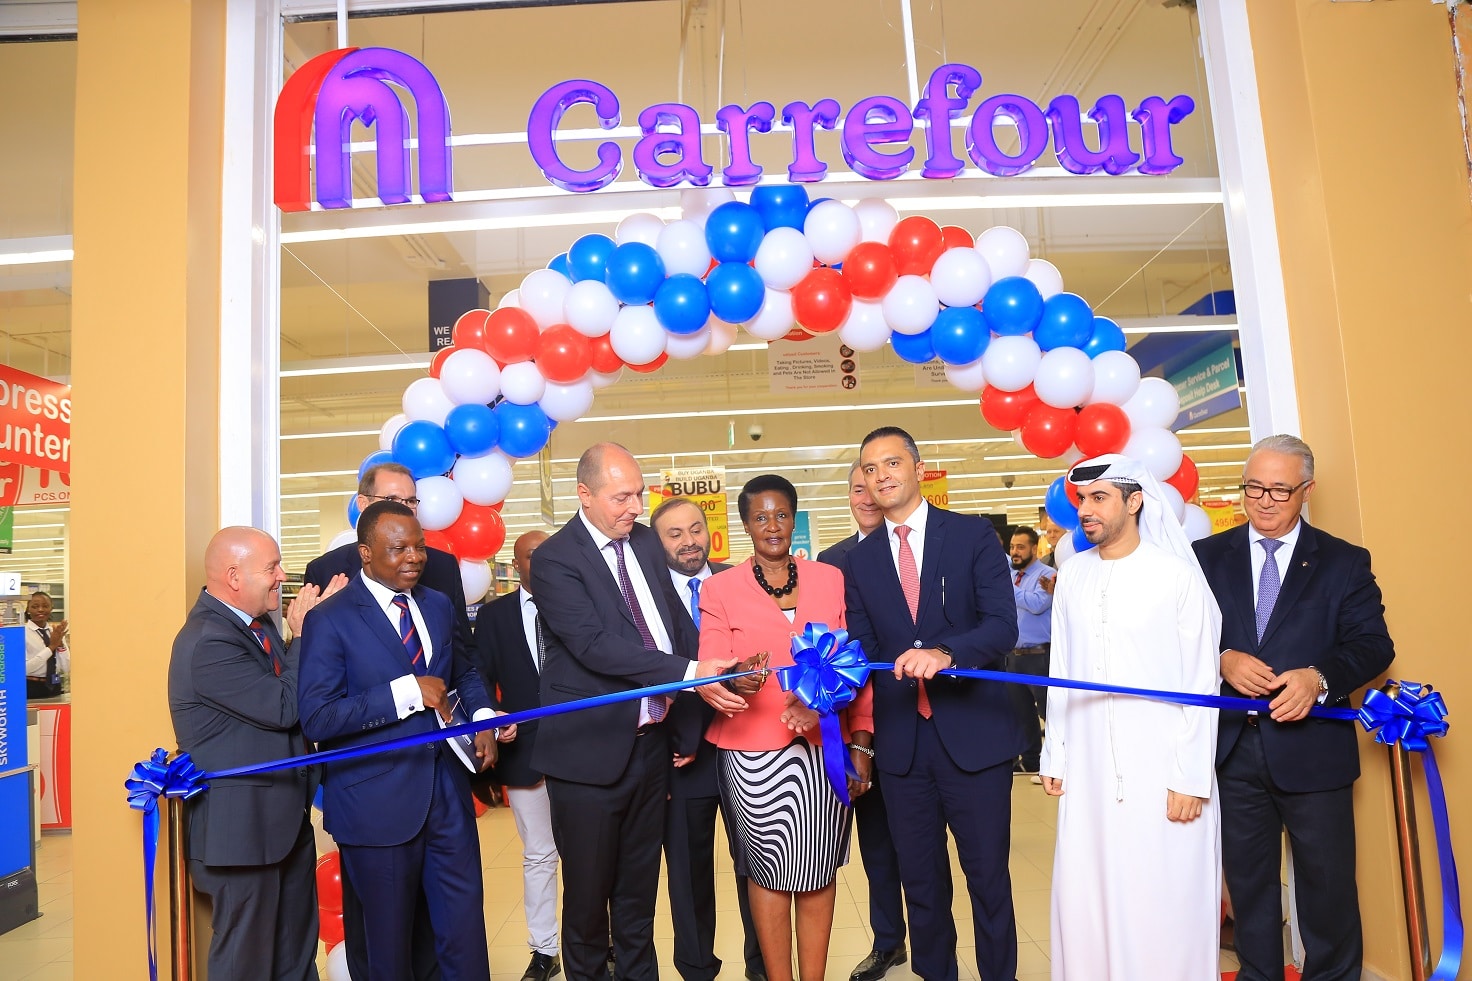 Carrefour opens store in Uganda Oasis Mall